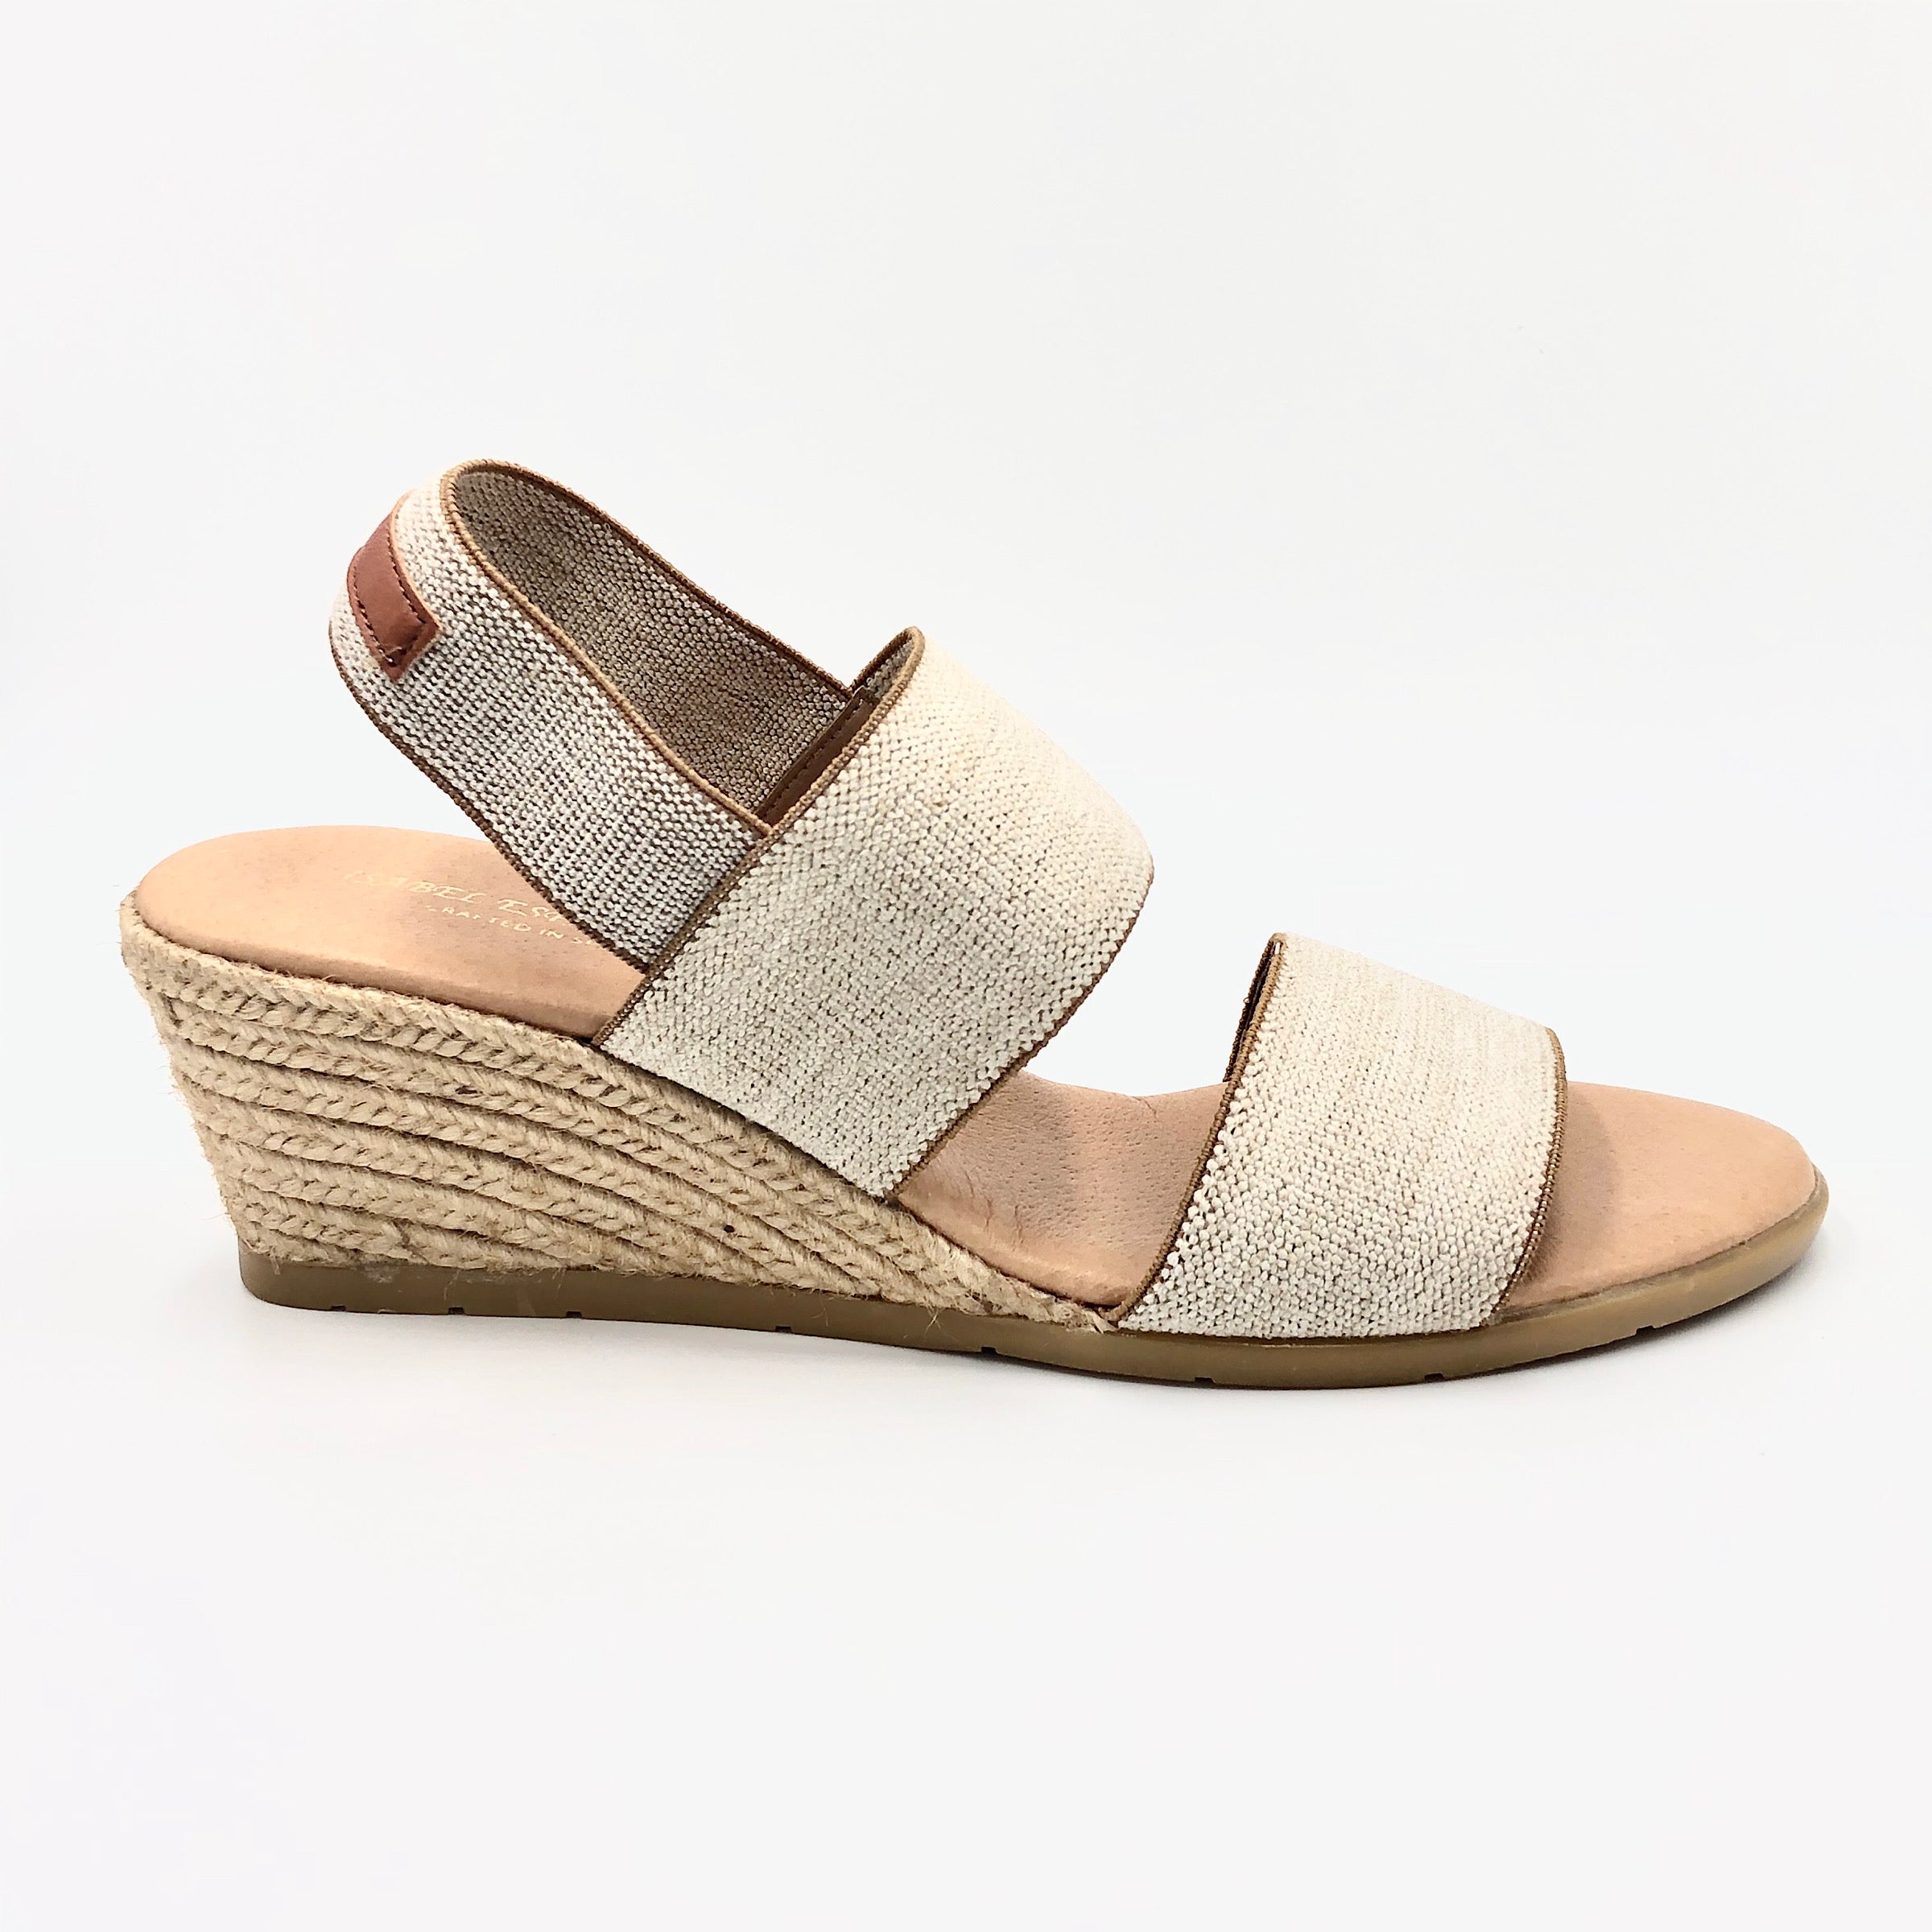 Betty - The Elastic 2 Band Espadrille in Natural Linen